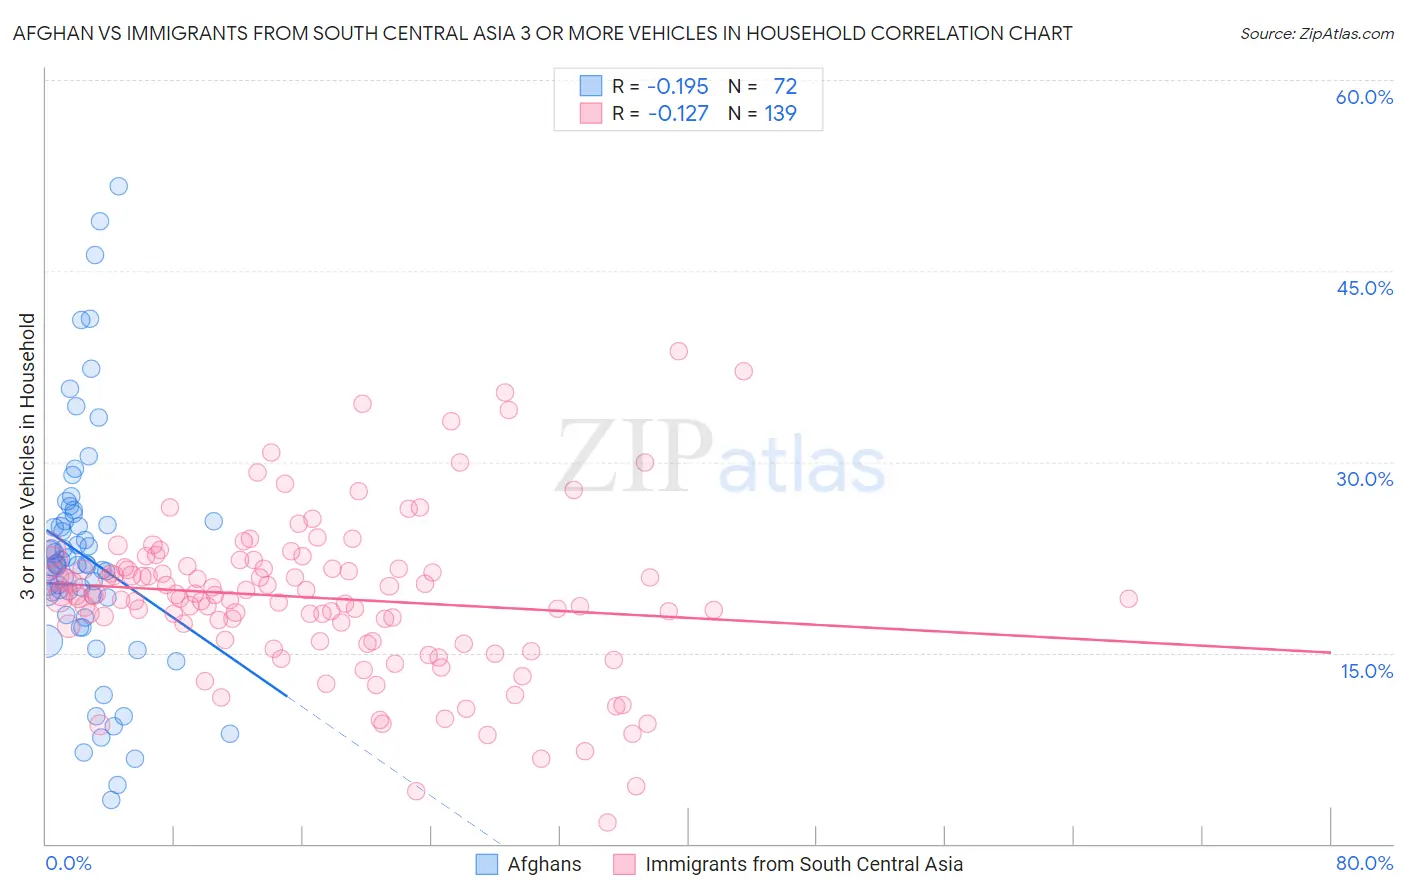 Afghan vs Immigrants from South Central Asia 3 or more Vehicles in Household